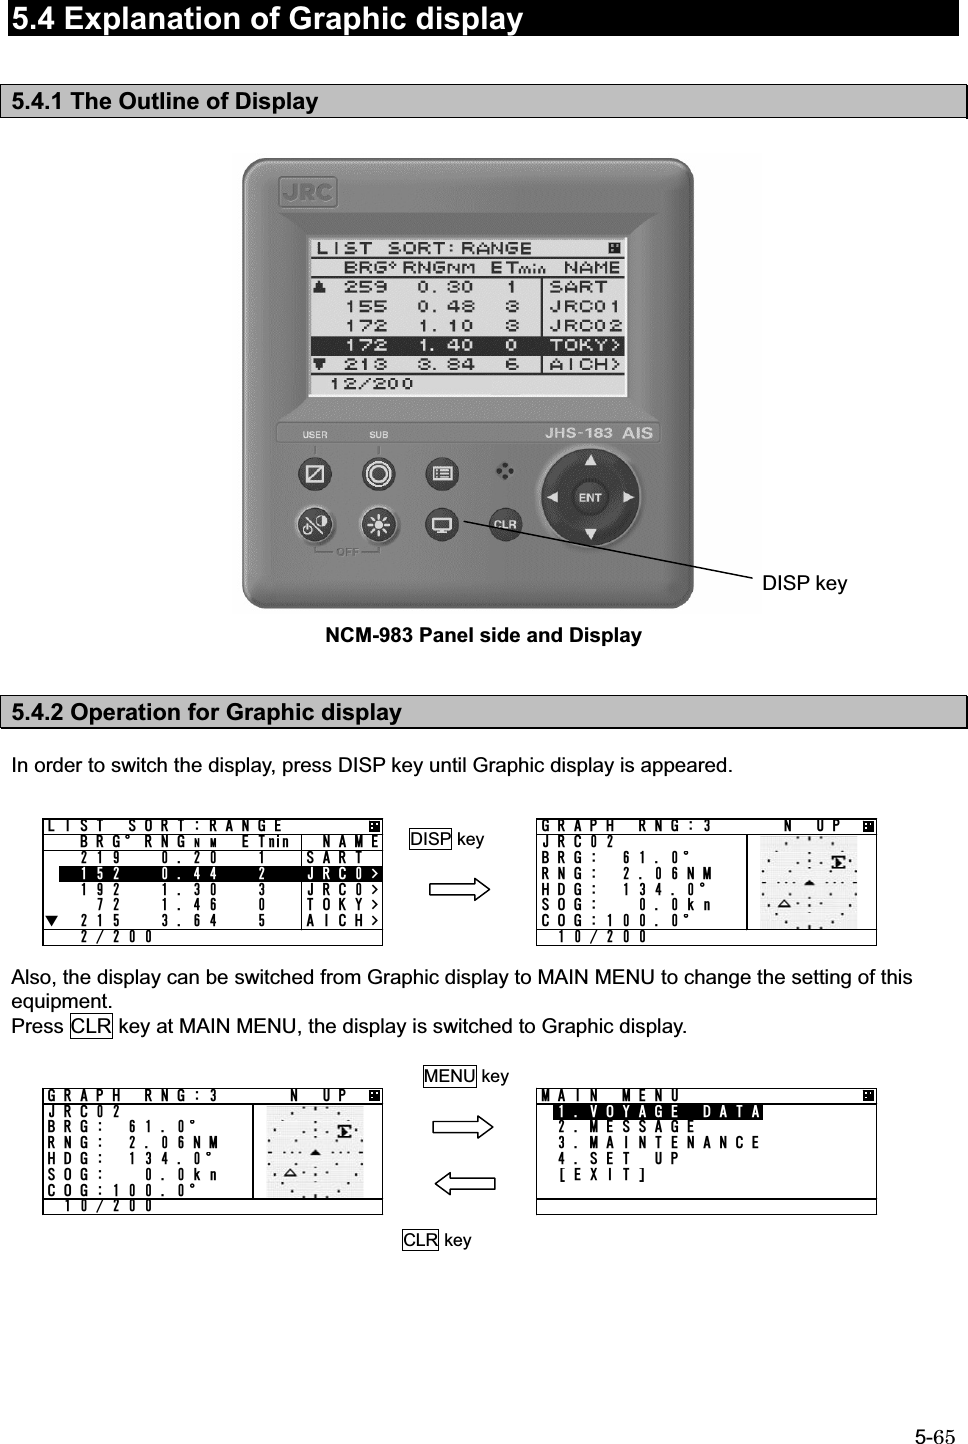 5-65  5.4 Explanation of Graphic display         5.4.1 The Outline of Display                      NCM-983 Panel side and Display   5.4.2 Operation for Graphic display  In order to switch the display, press DISP key until Graphic display is appeared.         Also, the display can be switched from Graphic display to MAIN MENU to change the setting of this equipment. Press CLR key at MAIN MENU, the display is switched to Graphic display.    DISP key DISP key MENU keyCLR key .+56 51464#0)&apos;$4)c40)0/&apos;6OKP 0#/&apos;   5#46   ,4%    ,4%    61-; Ť   #+%* /#+0 /&apos;0781;#)&apos; &amp;#6#/&apos;55#)&apos;/#+06&apos;0#0%&apos;5&apos;6 72=&apos;:+6?)4#2* 40) 0 72,4%$4) c40) 0/*&amp;) c51) MP%1)c)4#2* 40) 0 72,4%$4) c40) 0/*&amp;) c51) MP%1)c